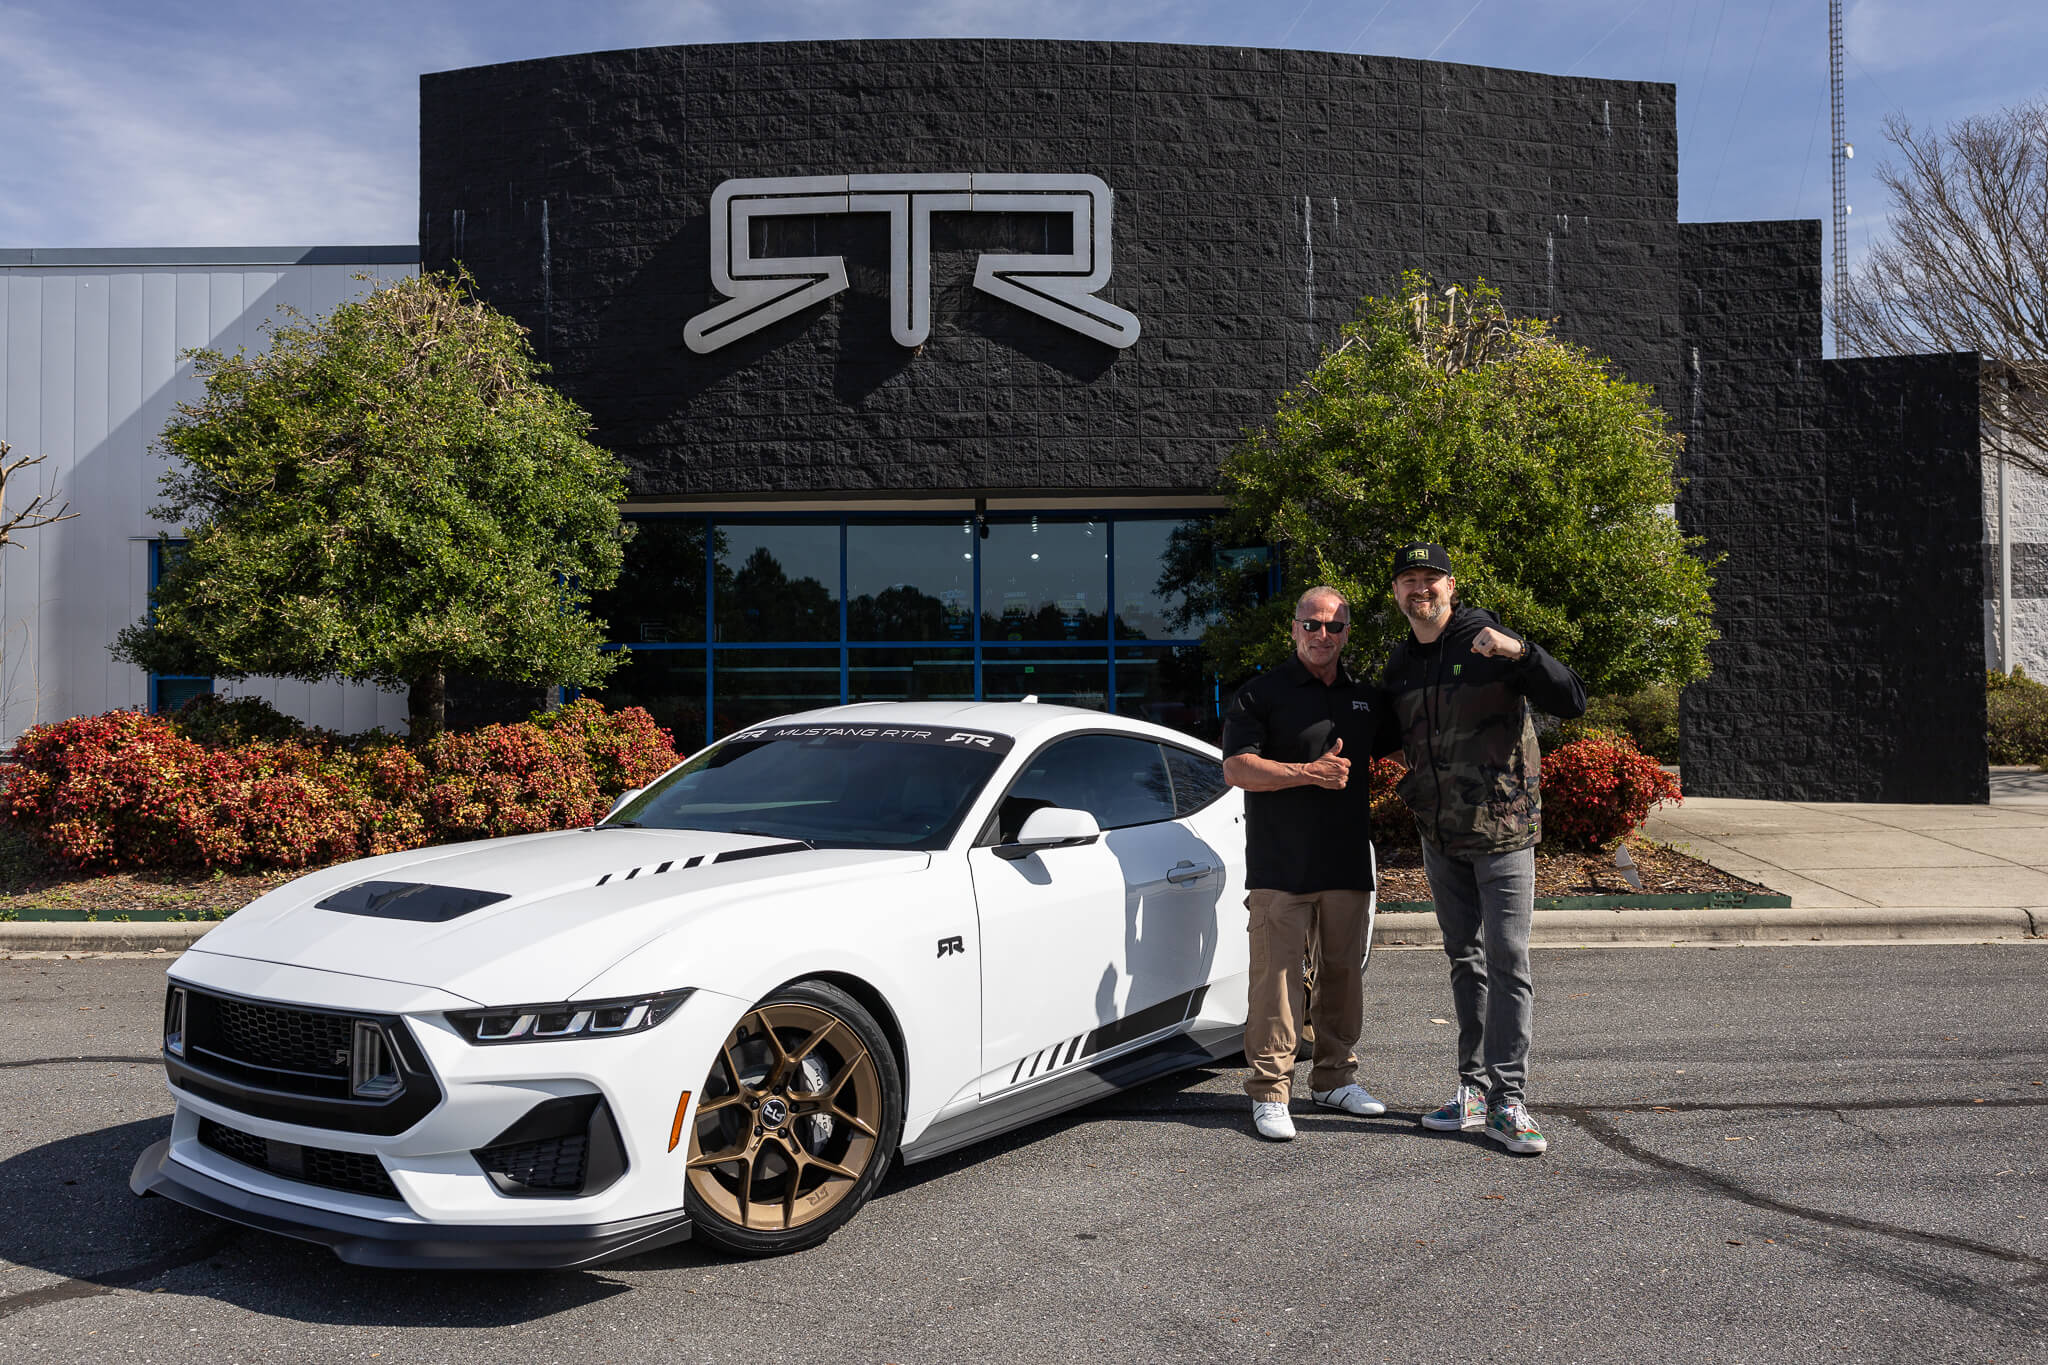 Vaughn takes a photo with a new RTR owner